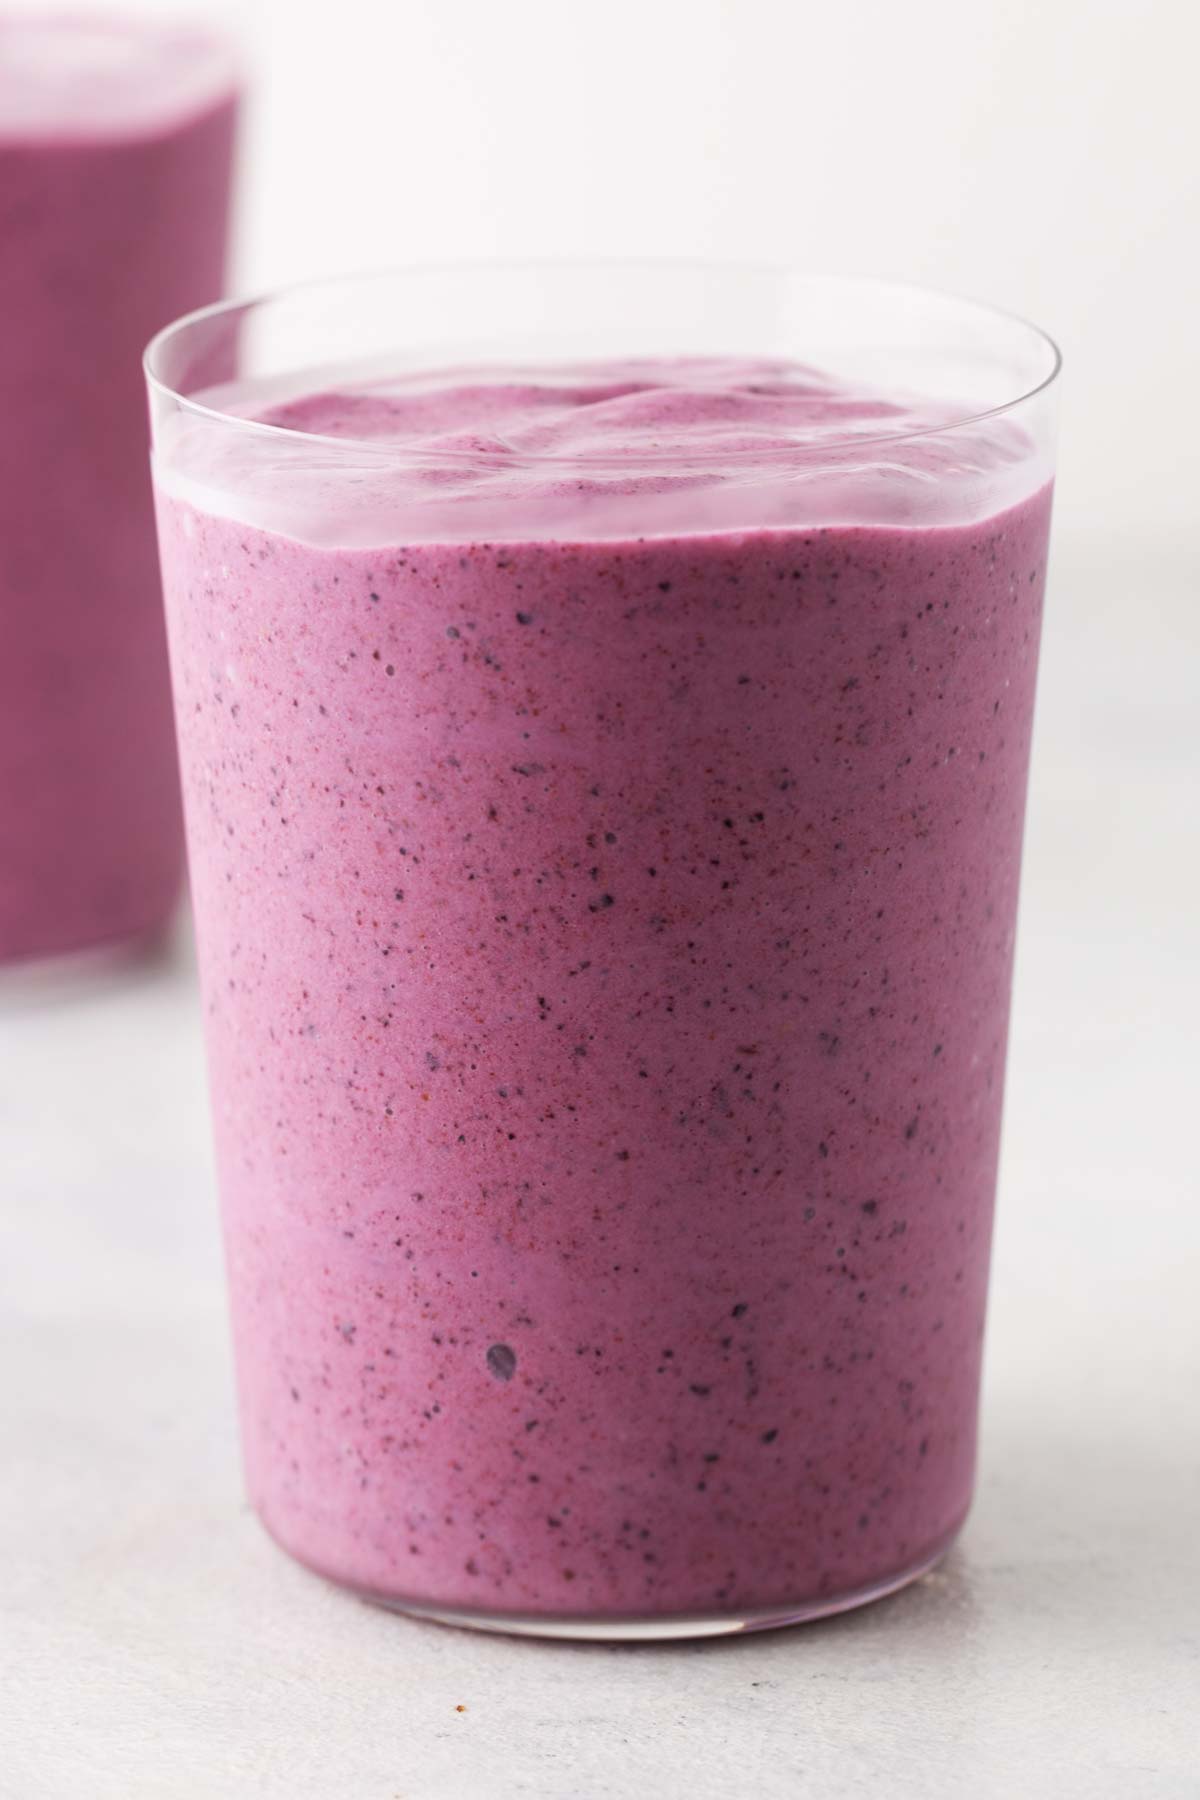 Strawberry blueberry smoothie in a glass.